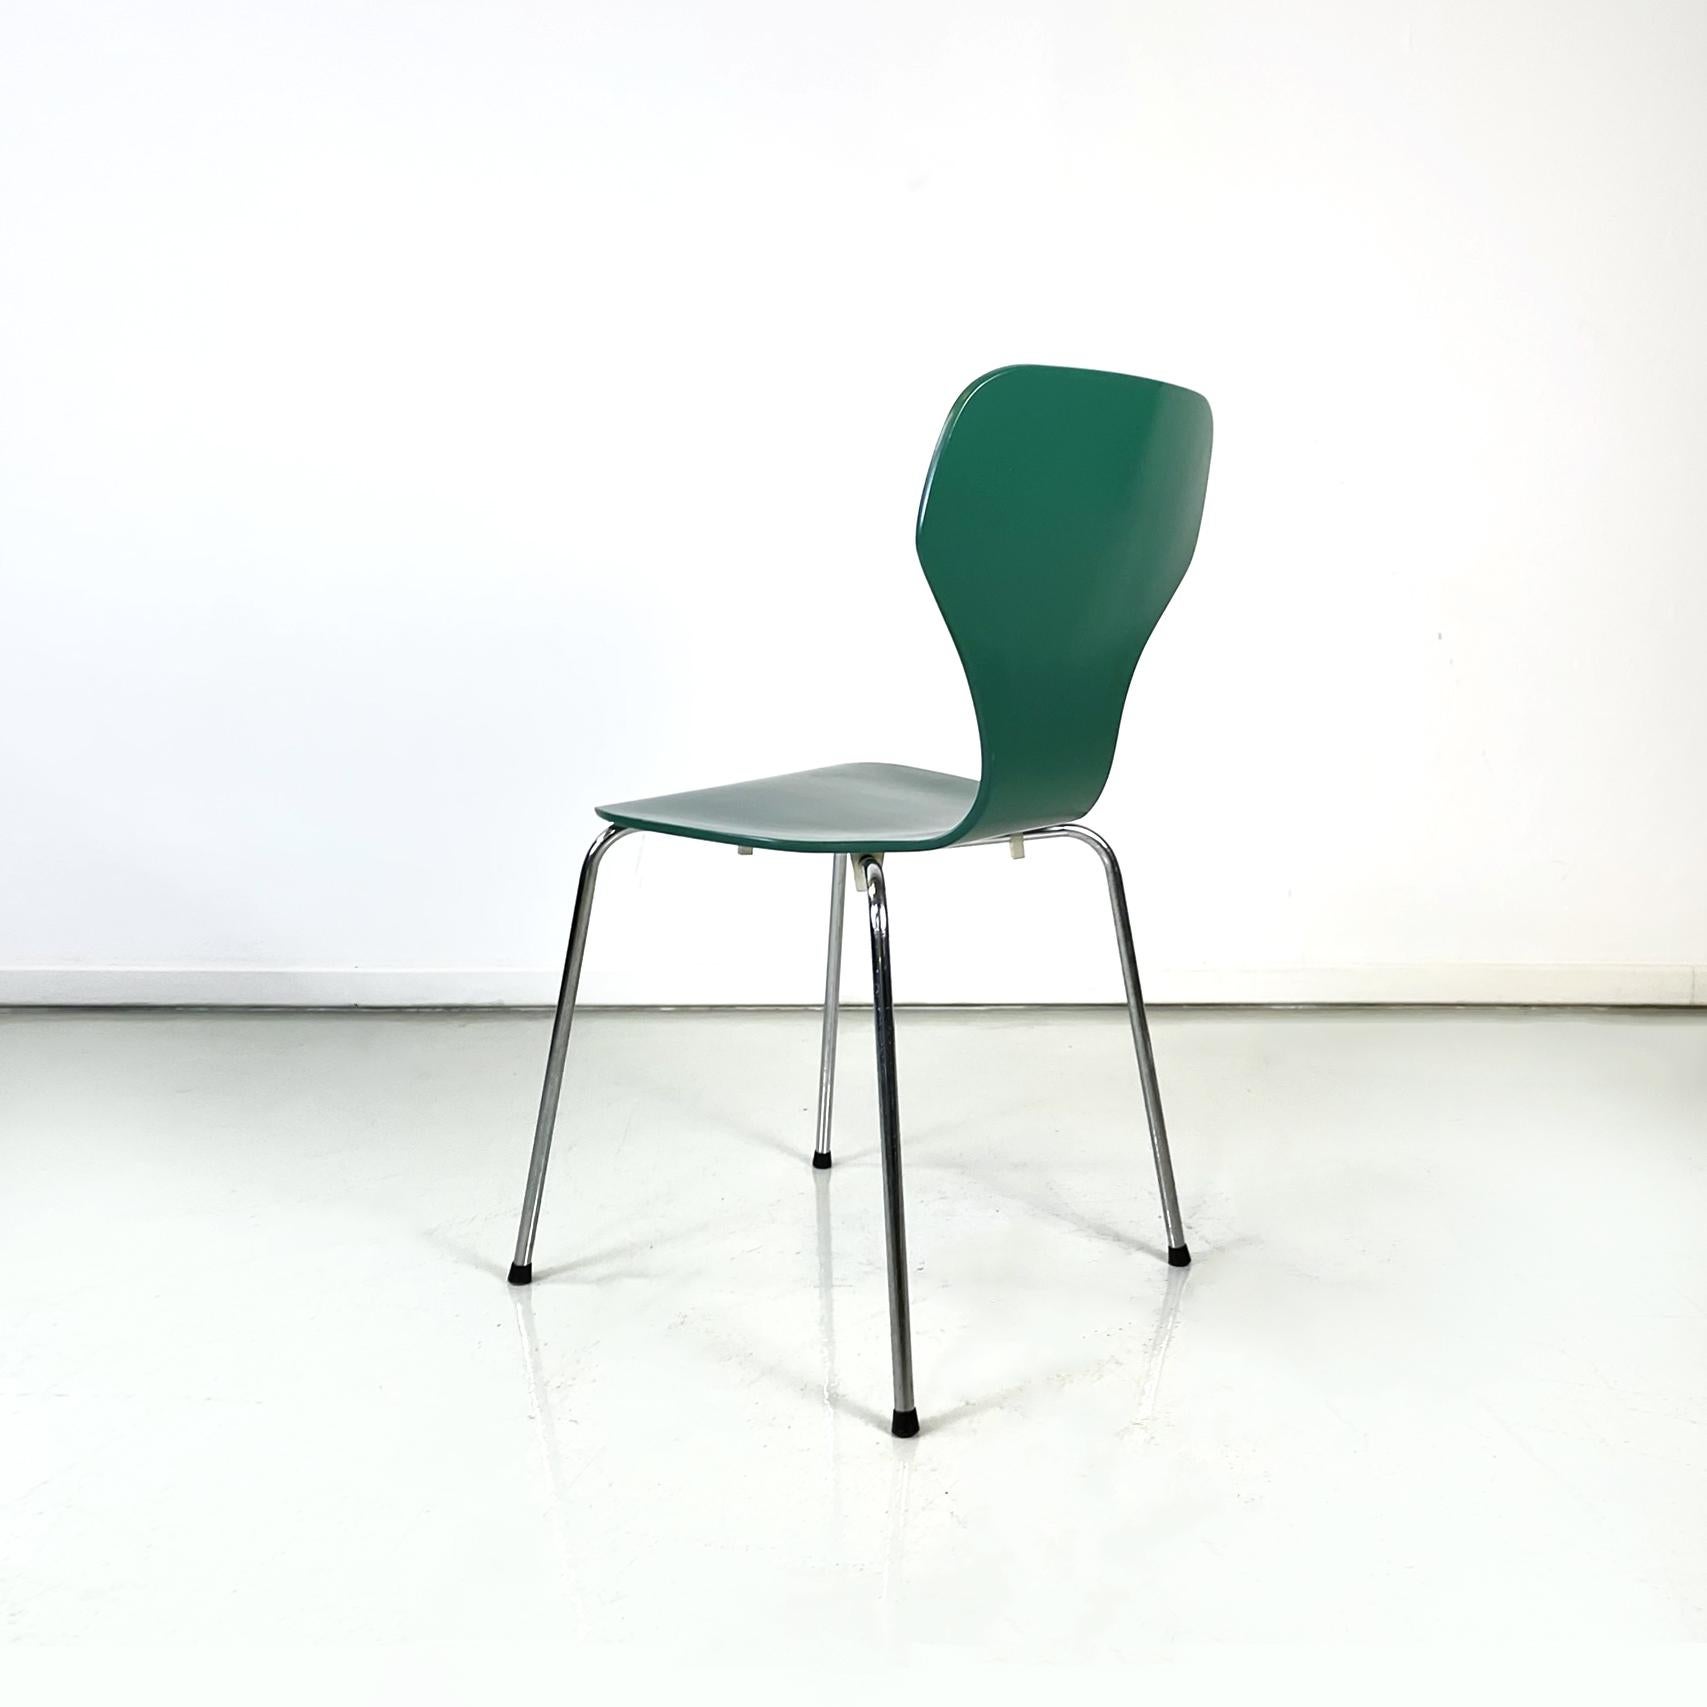 Late 20th Century Danish Modern Green Wooden and Steel Chair by Phoenix, 1970s